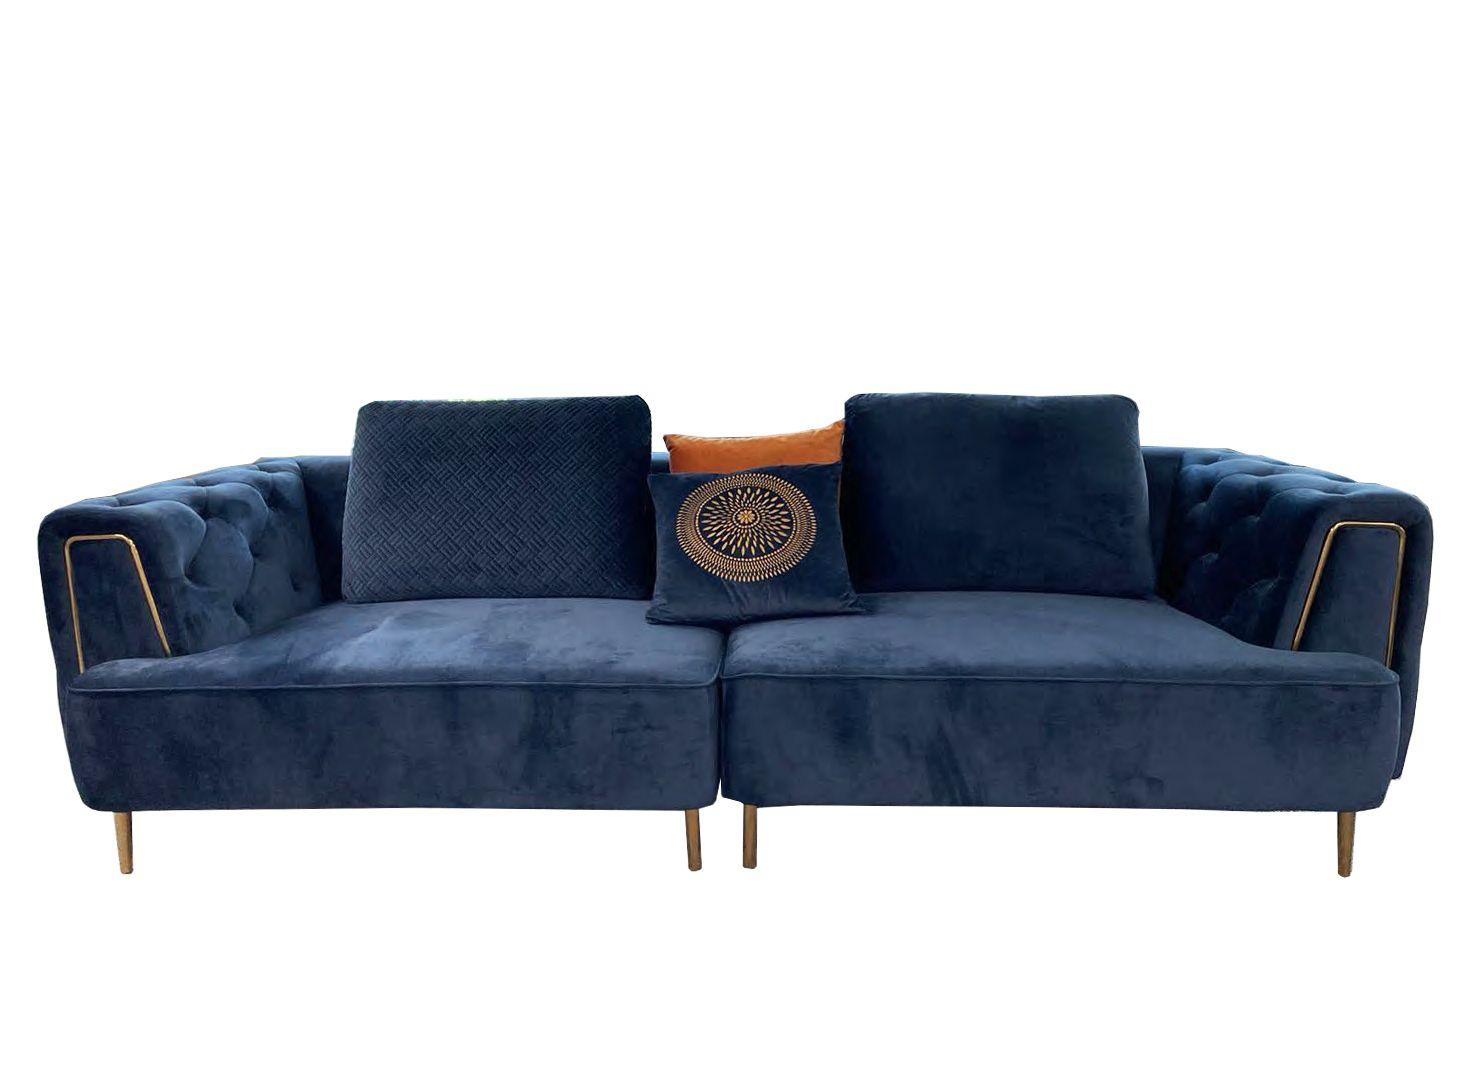 Contemporary Extra Long Sofa AE-D832-RB-4S AE-D832-RB-4S in Blue Fabric